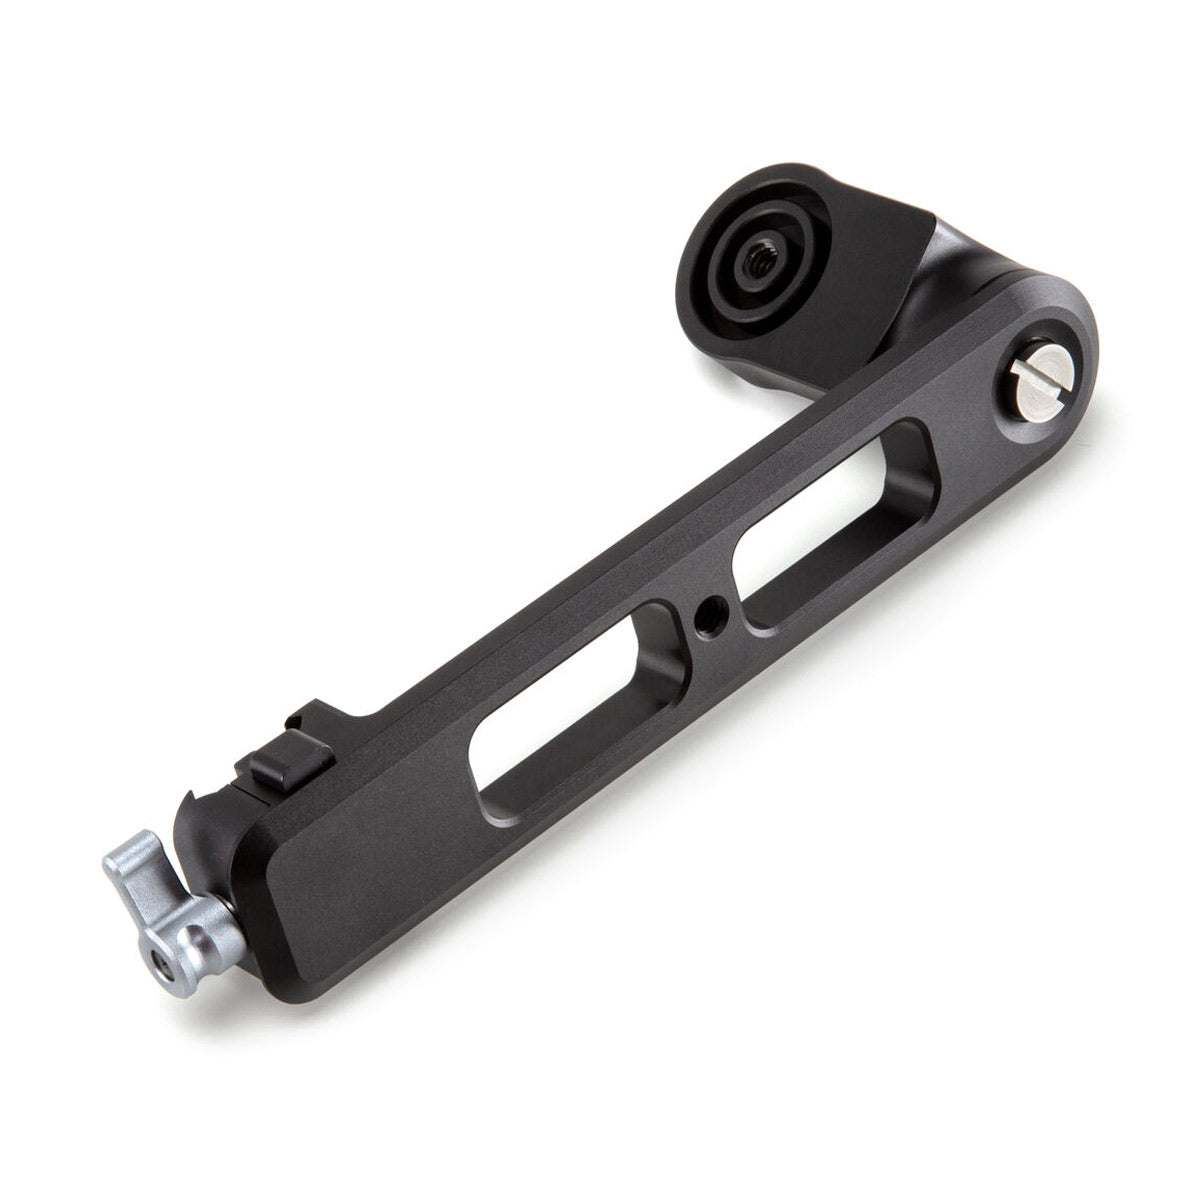 DJI R Briefcase Handle for RS 2 & RSC 2 Gimbals